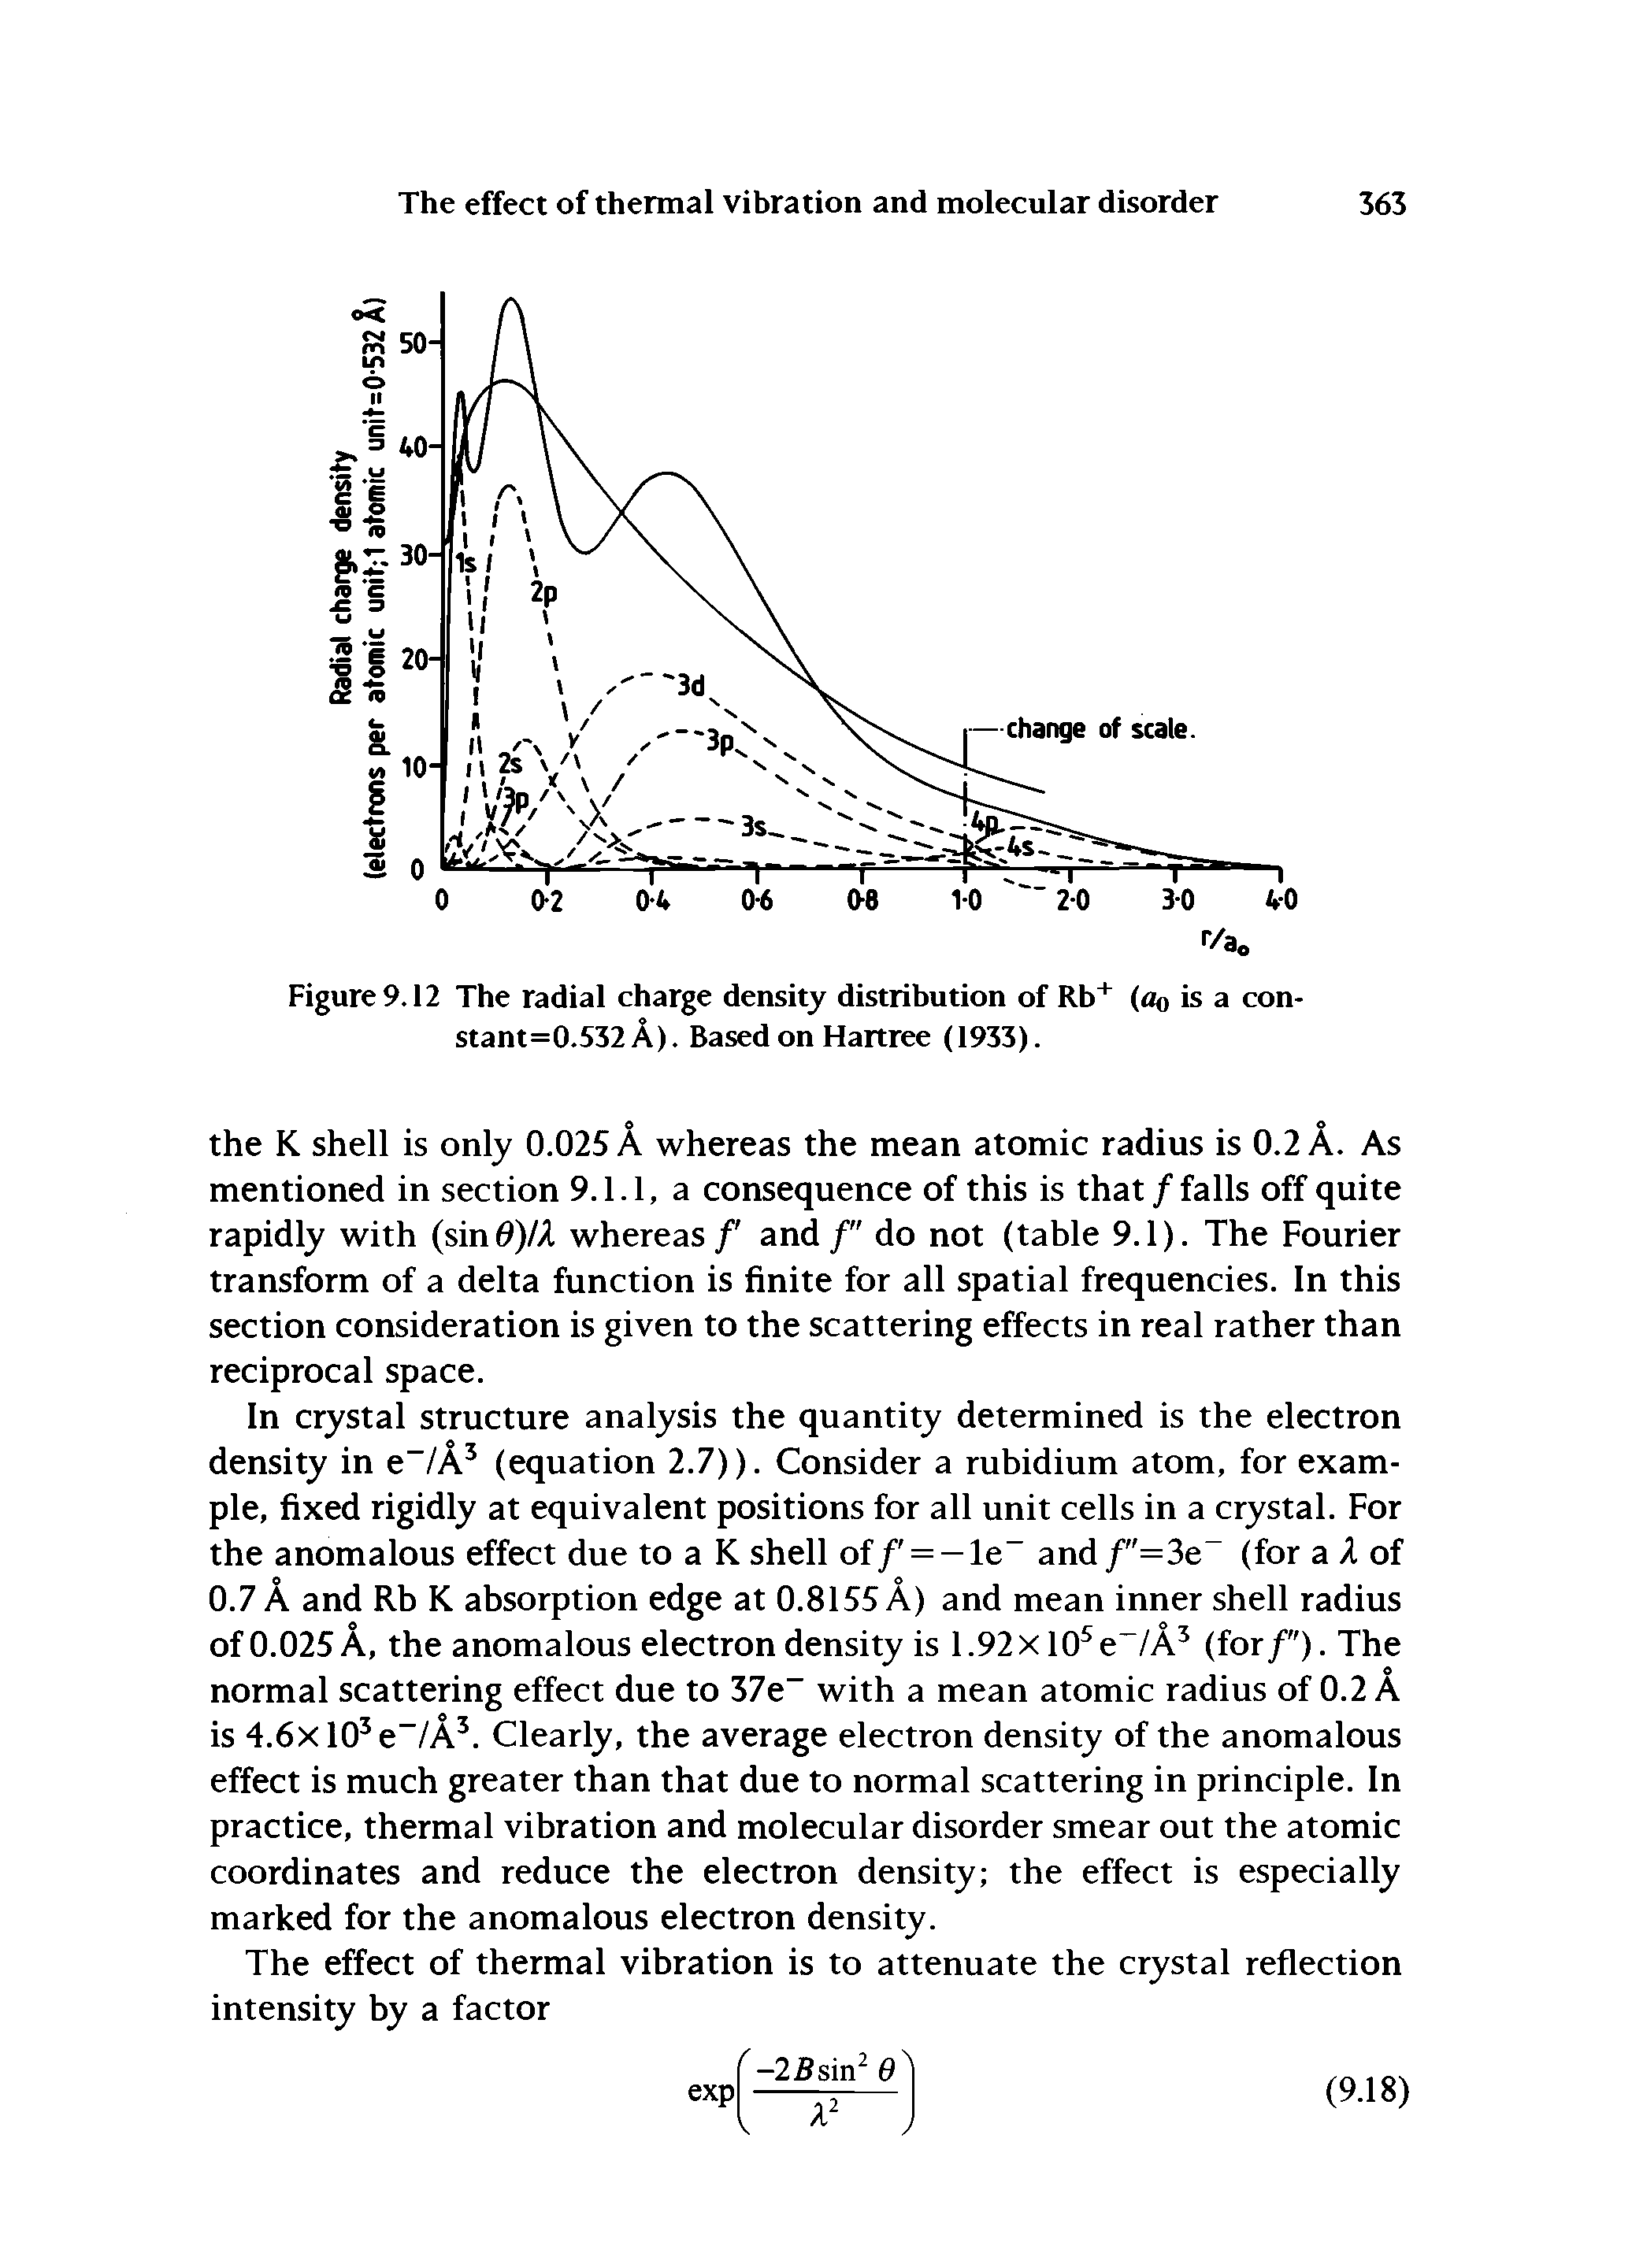 Figure 9.12 The radial charge density distribution of Rb+ (tf0 is a con-stant=0.532 A). Based on Hartree (1933).